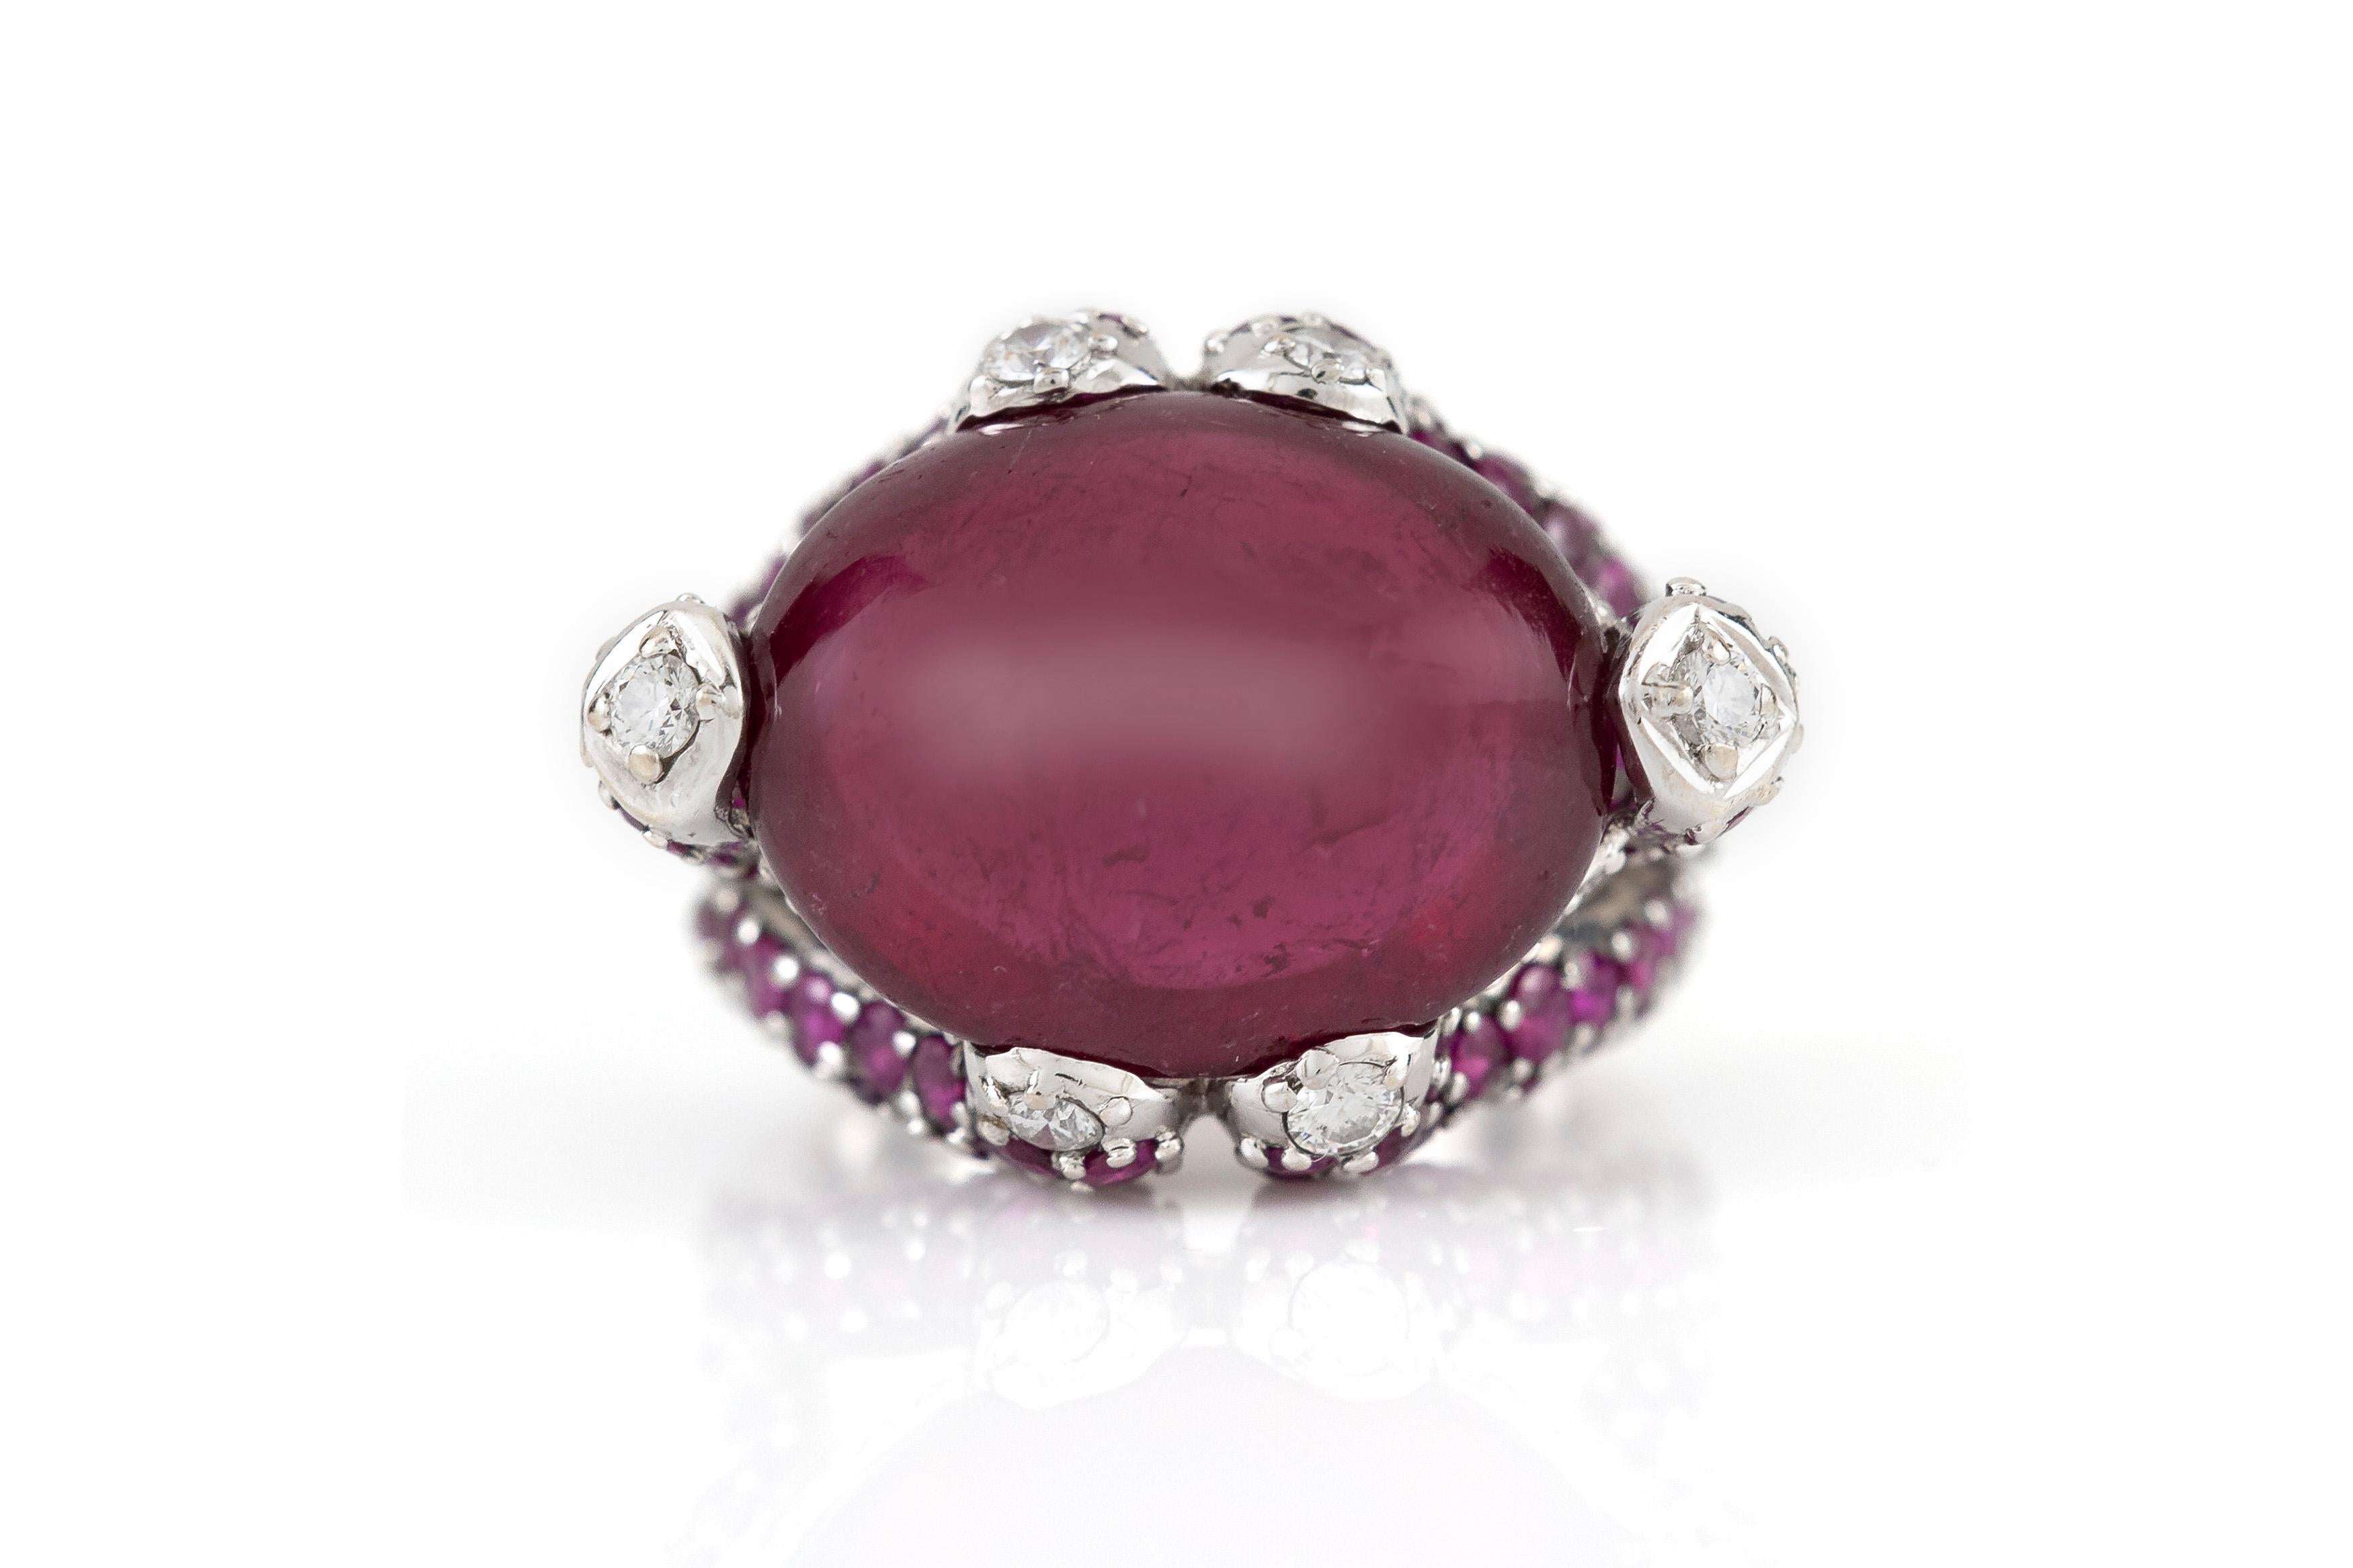 The ring is finely crafted in 18k white gold with robelite as center stone weighing approximately total of 12.00 carat, diamonds on the side weighing approximately total of 0.20 carat and ruby on the side weighing approximately total of 2.00 carat.